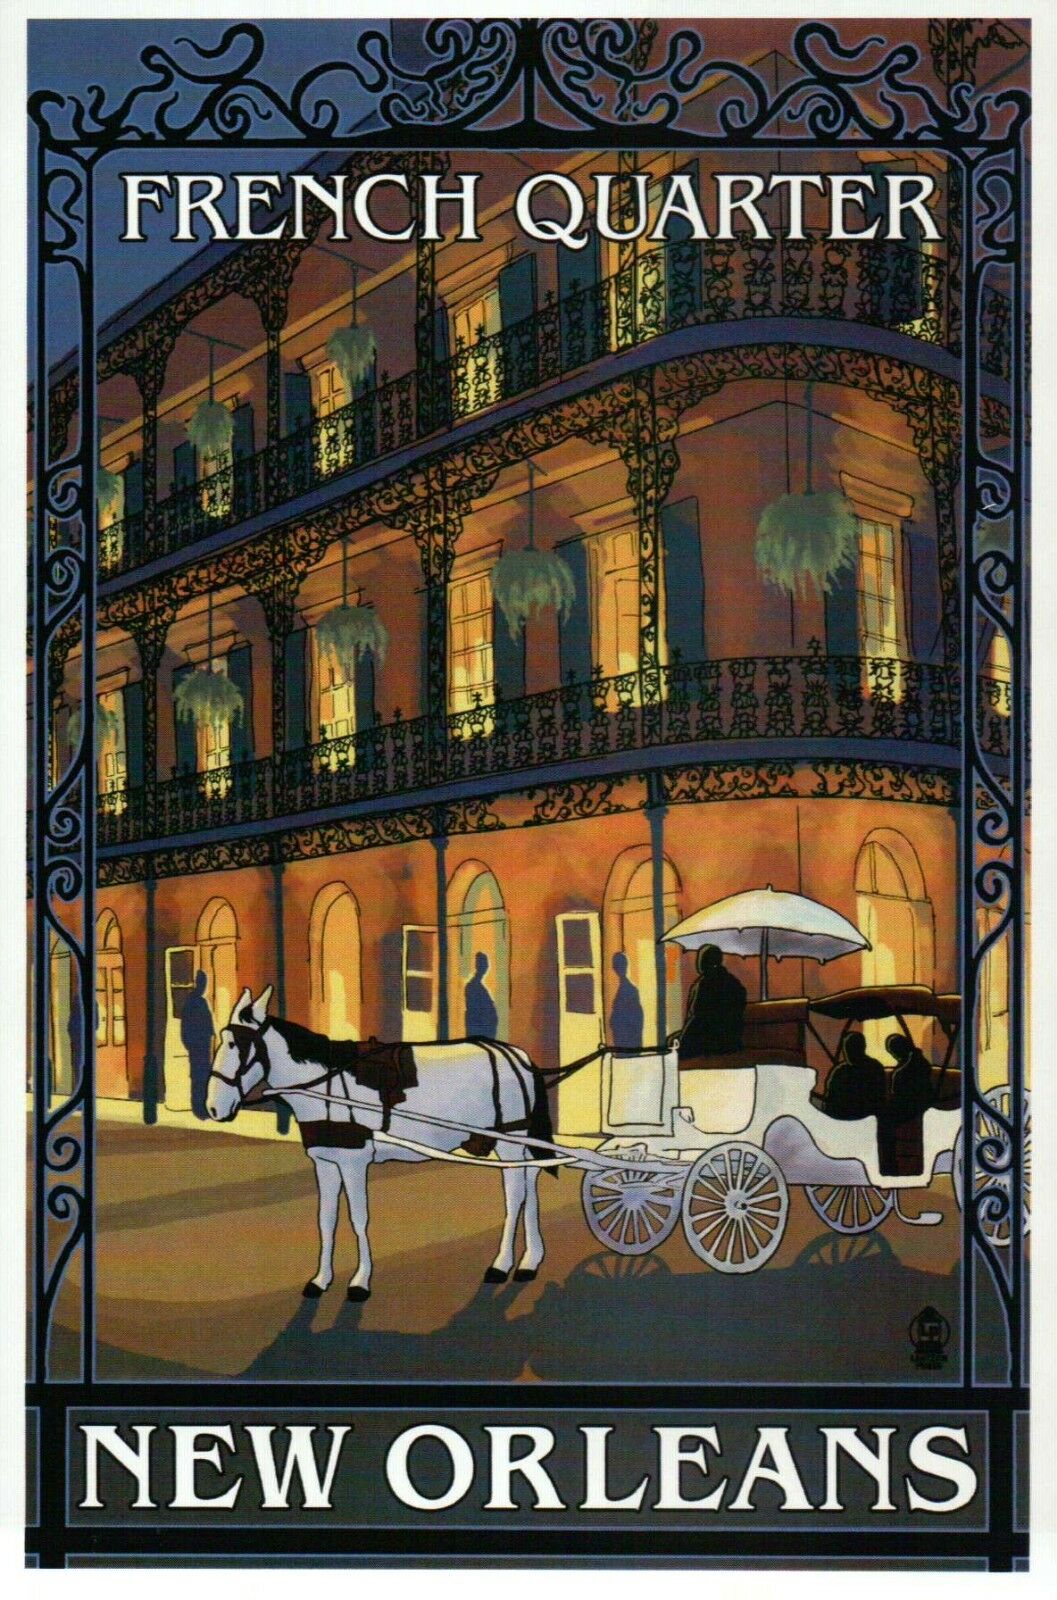 French Quarter New Orleans Louisiana, Horse Carriage At Night, No La -- Postcard